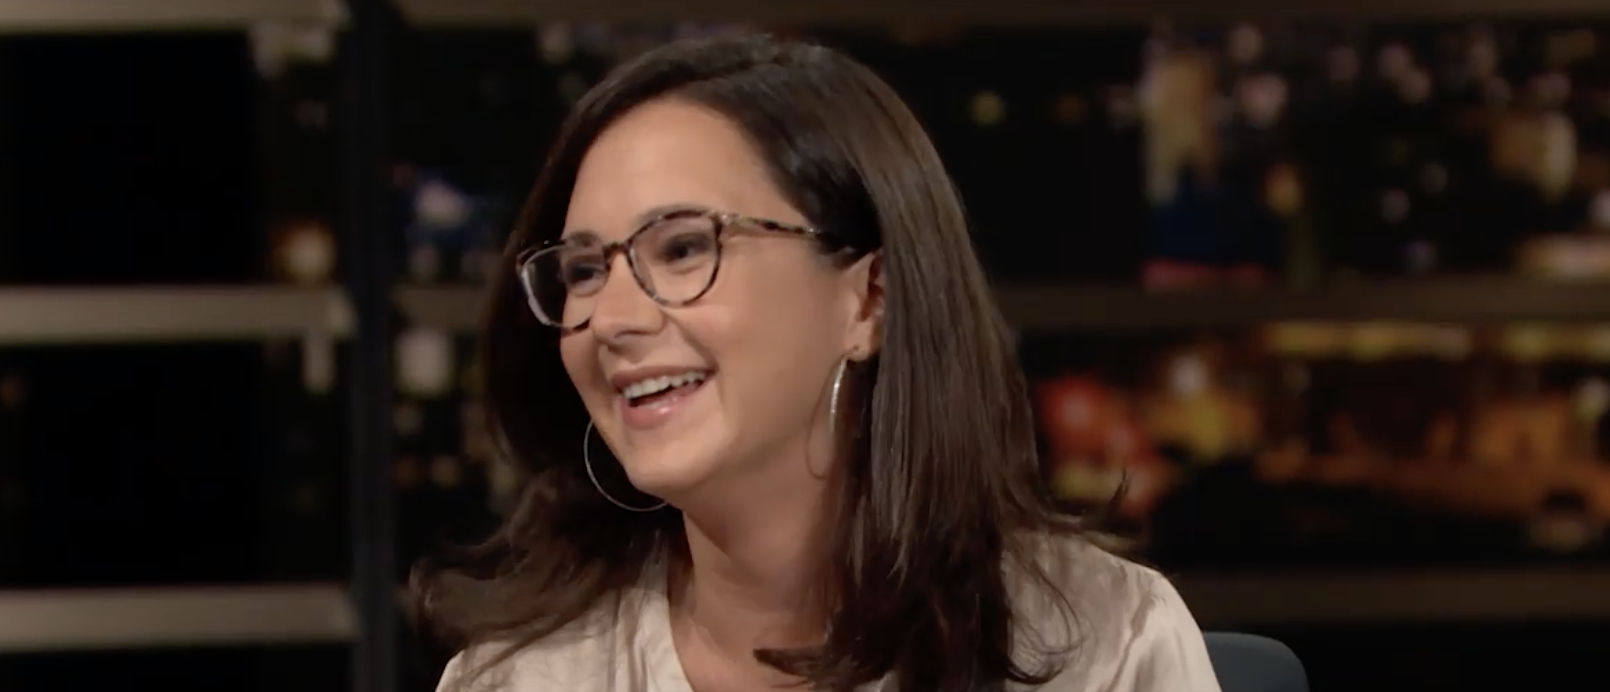 Bari Weiss spoke to Megyn Kelly about her time at The New York Times. (Screenshot YouTube, Real Time with Bill Maher, https://www.youtube.com/watch?v=9d27LLmm720)